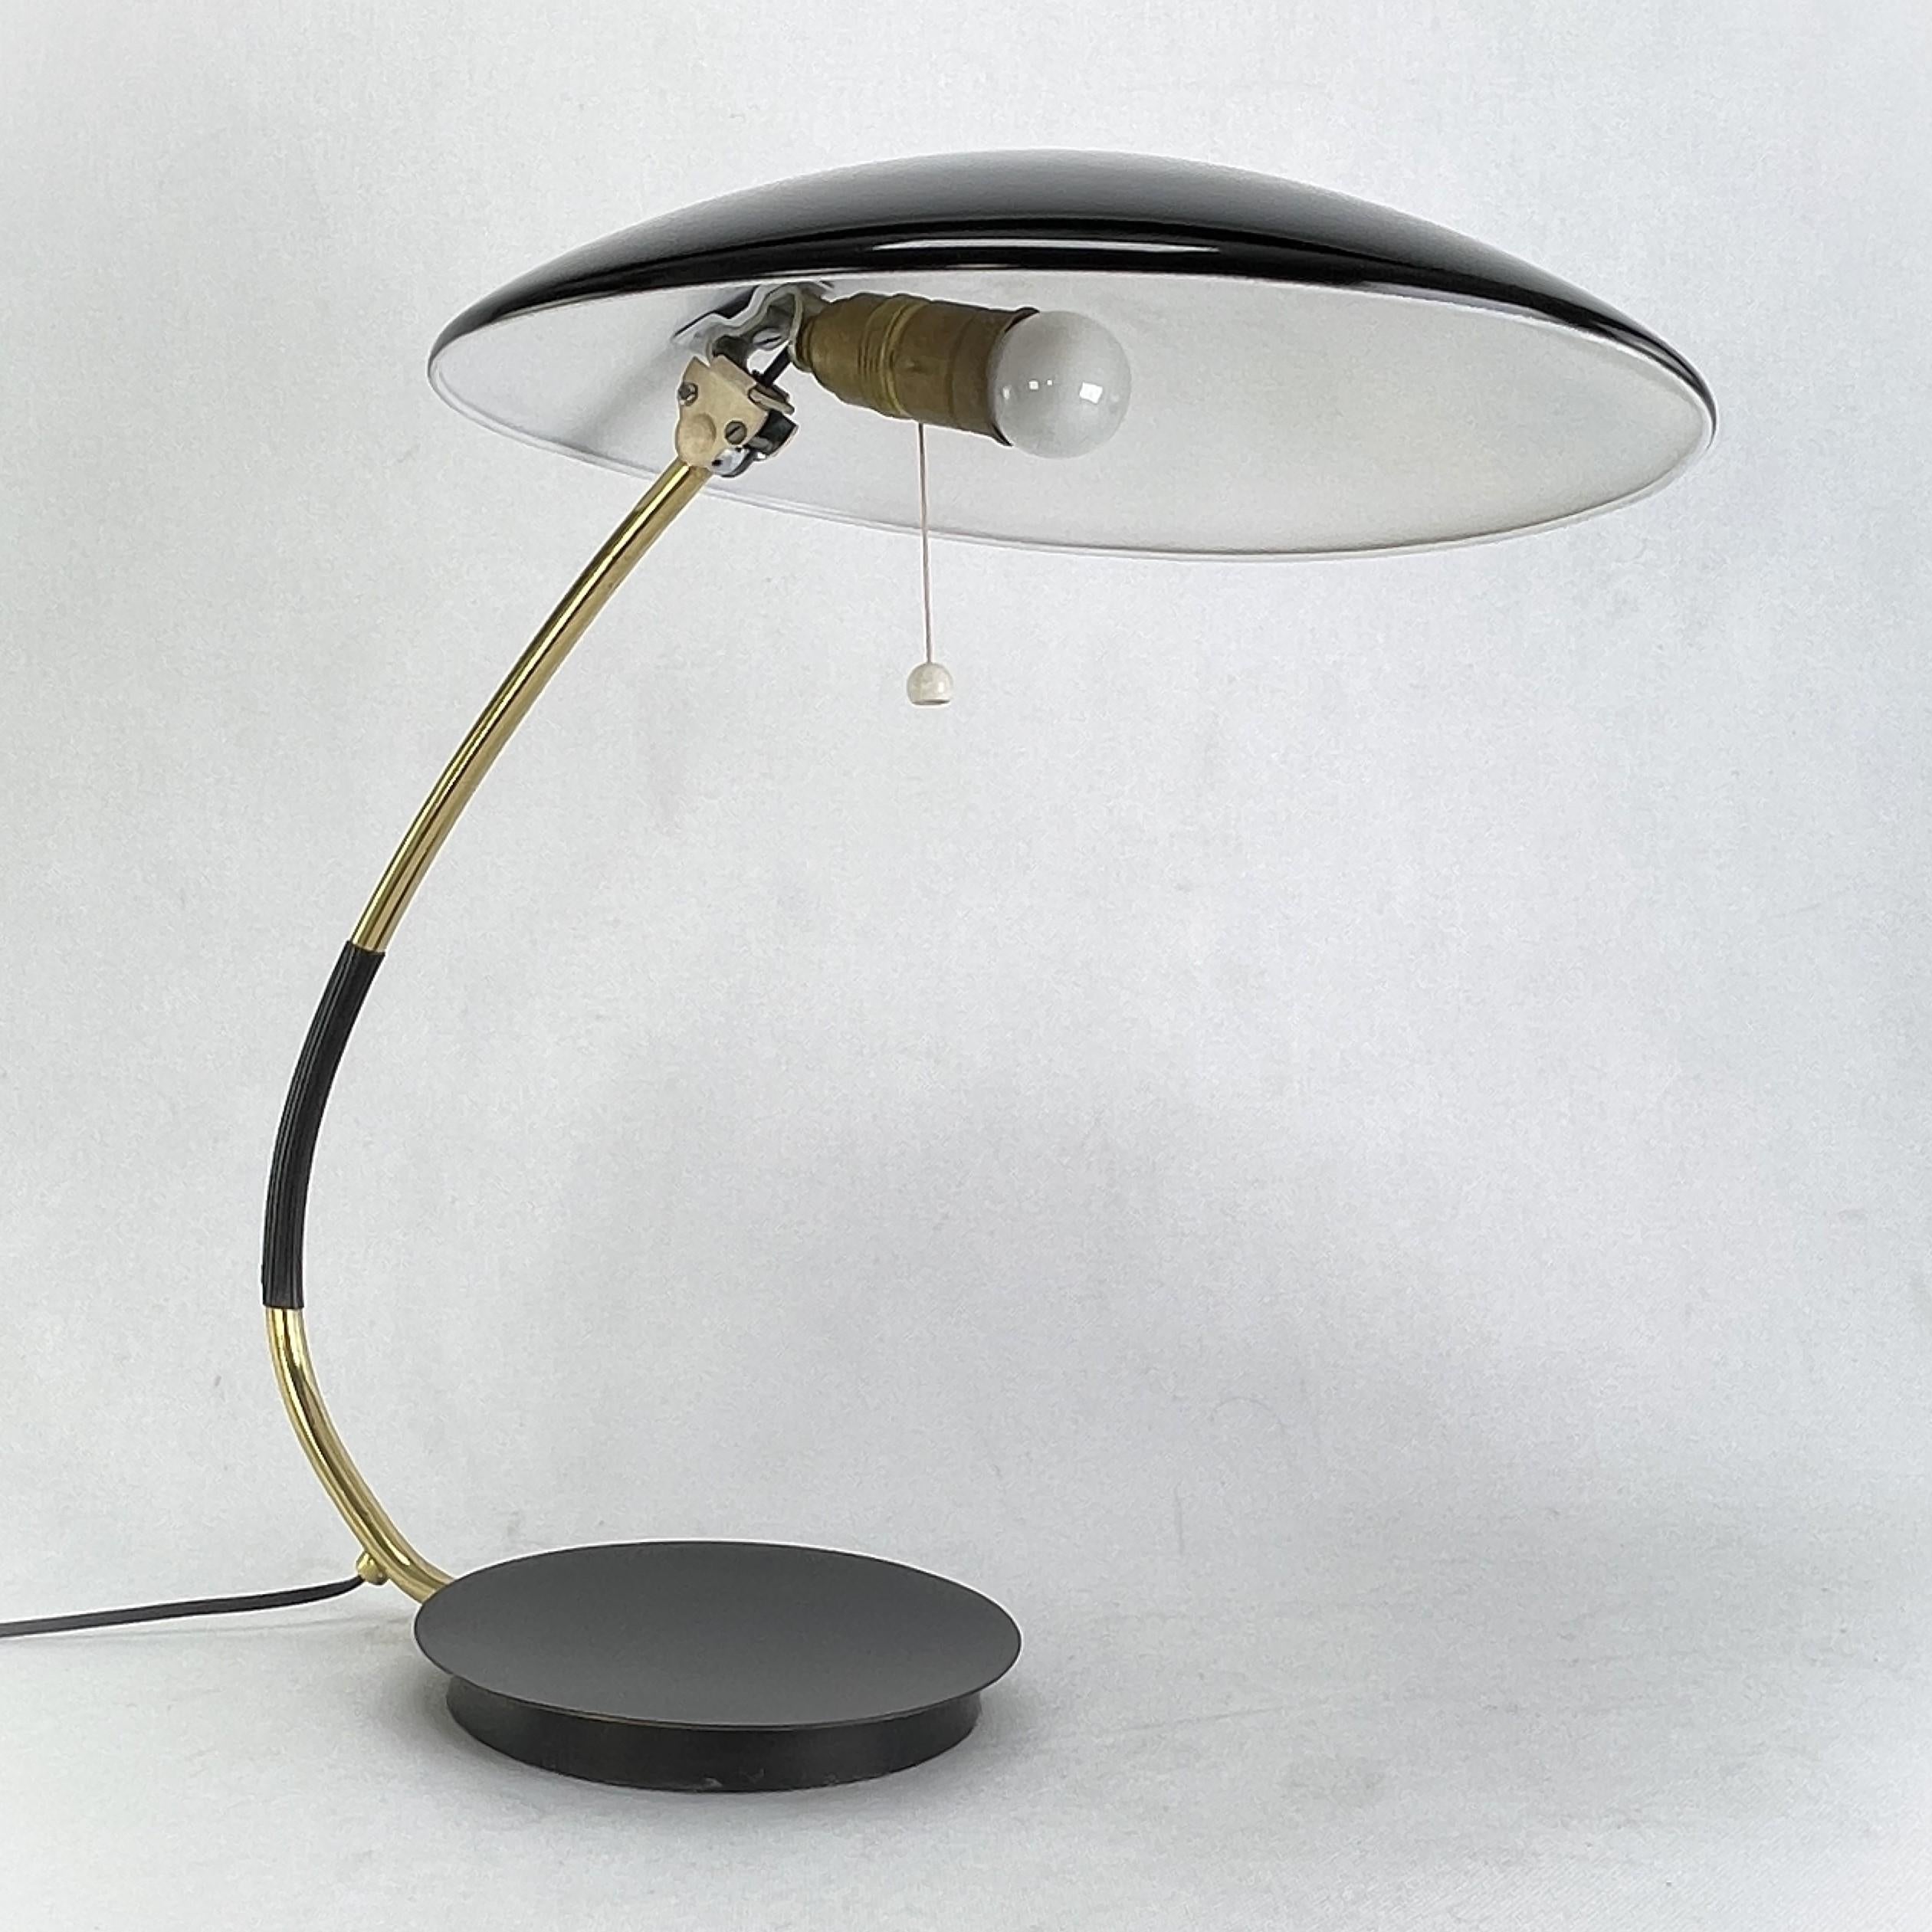 Table Lamp from Kaiser Idell - 1950s.

This black and gold desk lamp was produced in the midcentury era. The Kaiser Idell lamp is a design by Christian Dell. The lamp with the modell number 6787 still impresses with its simple bauhaus